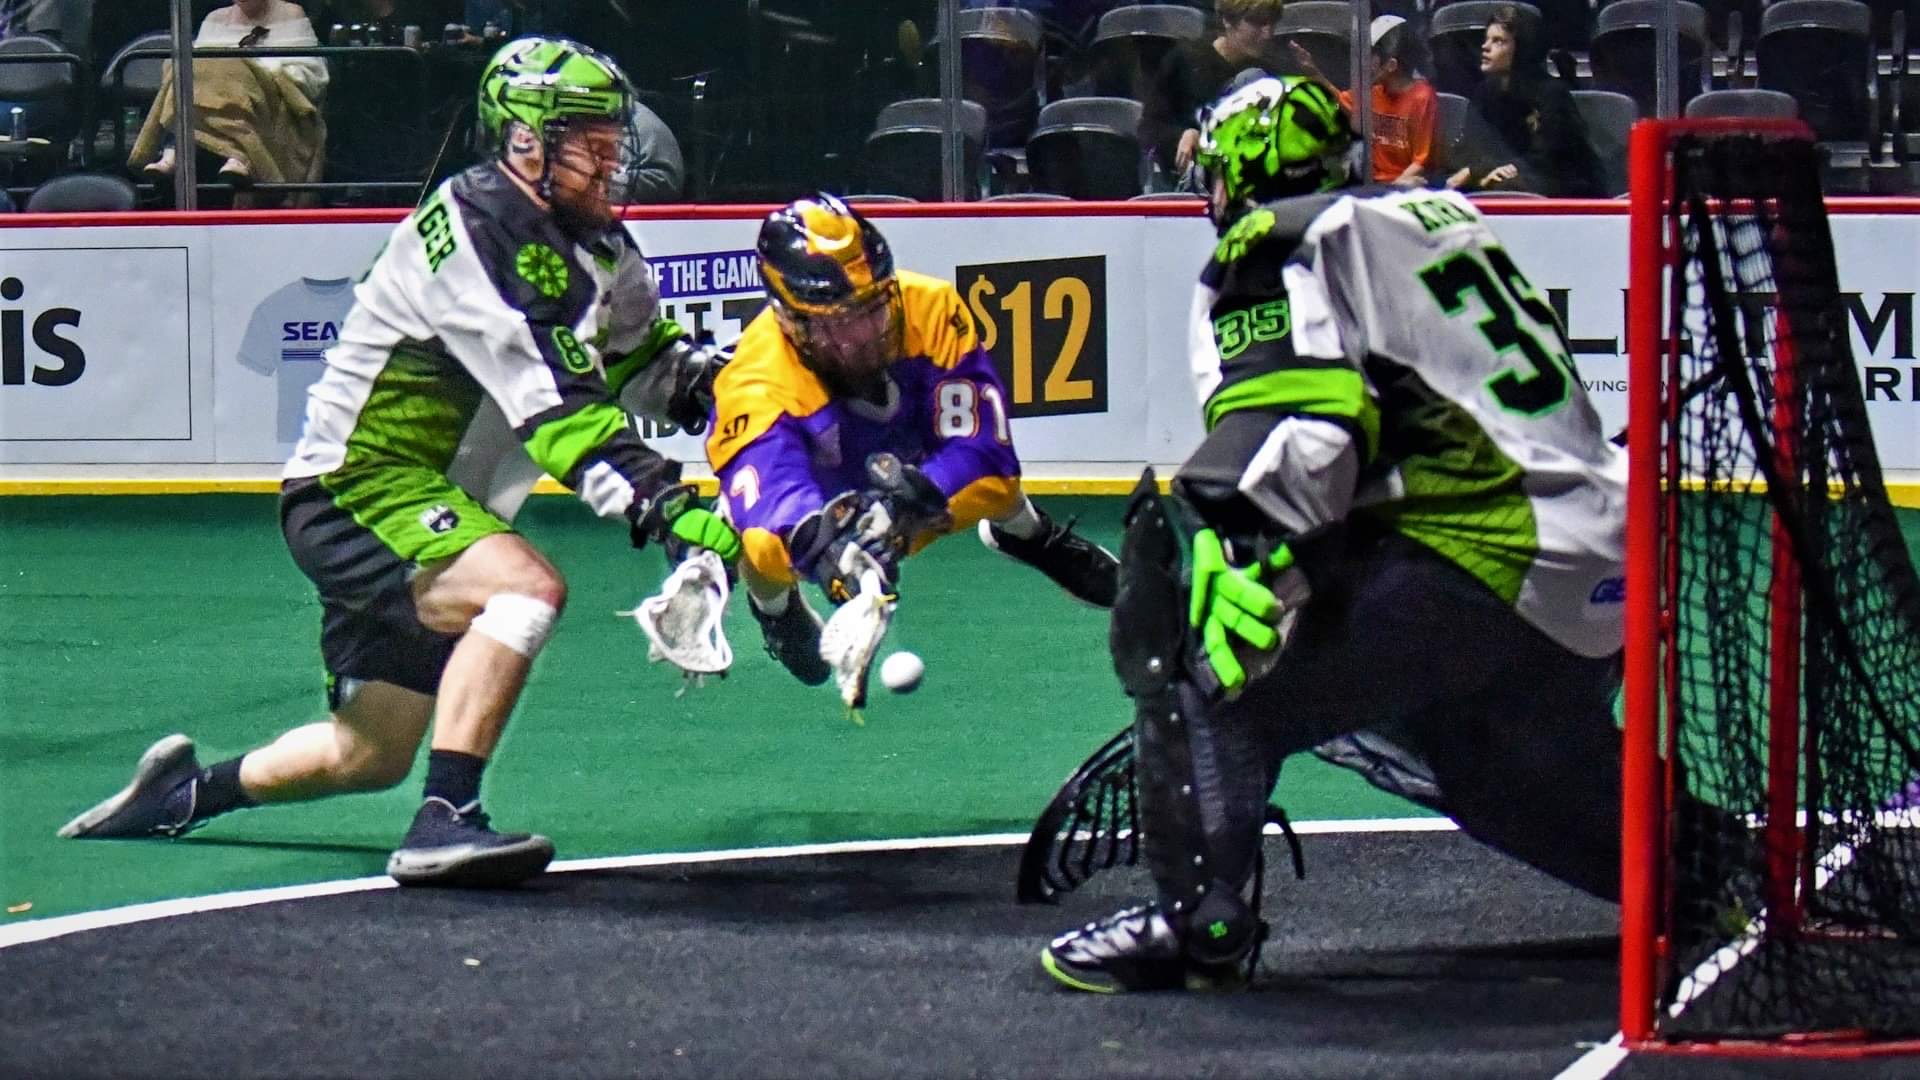 San Diego Seals score a goal in their most recent game on Mar. 7, 2020, part of a 19-6 record-breaking victory.